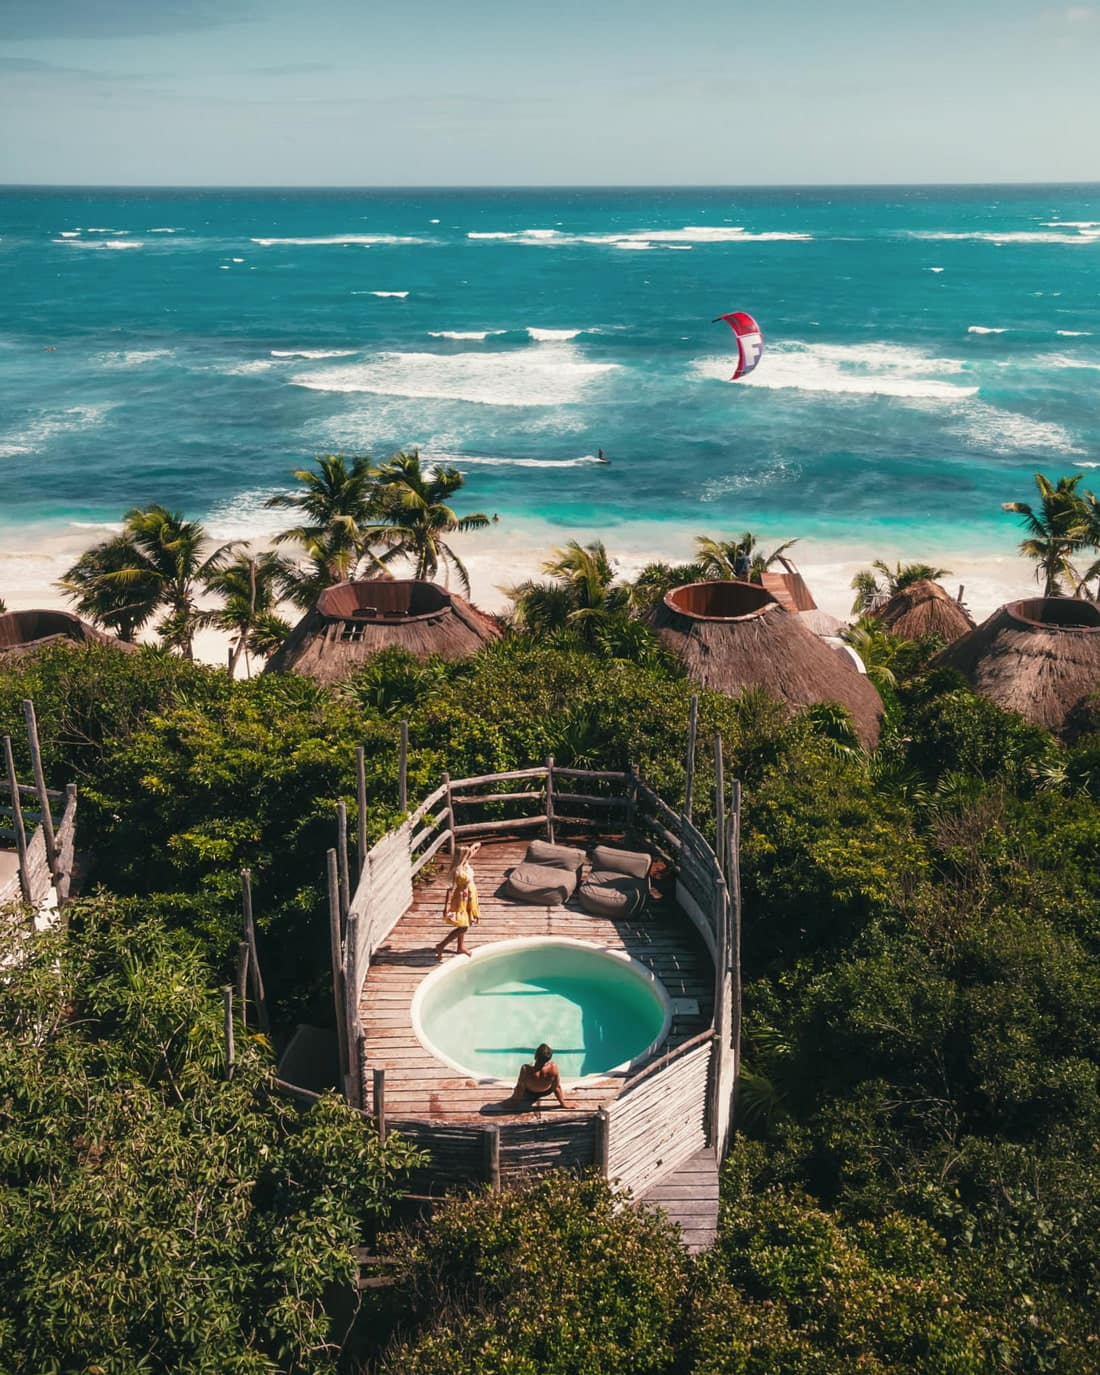 Instagrammable Hotel in Mexico